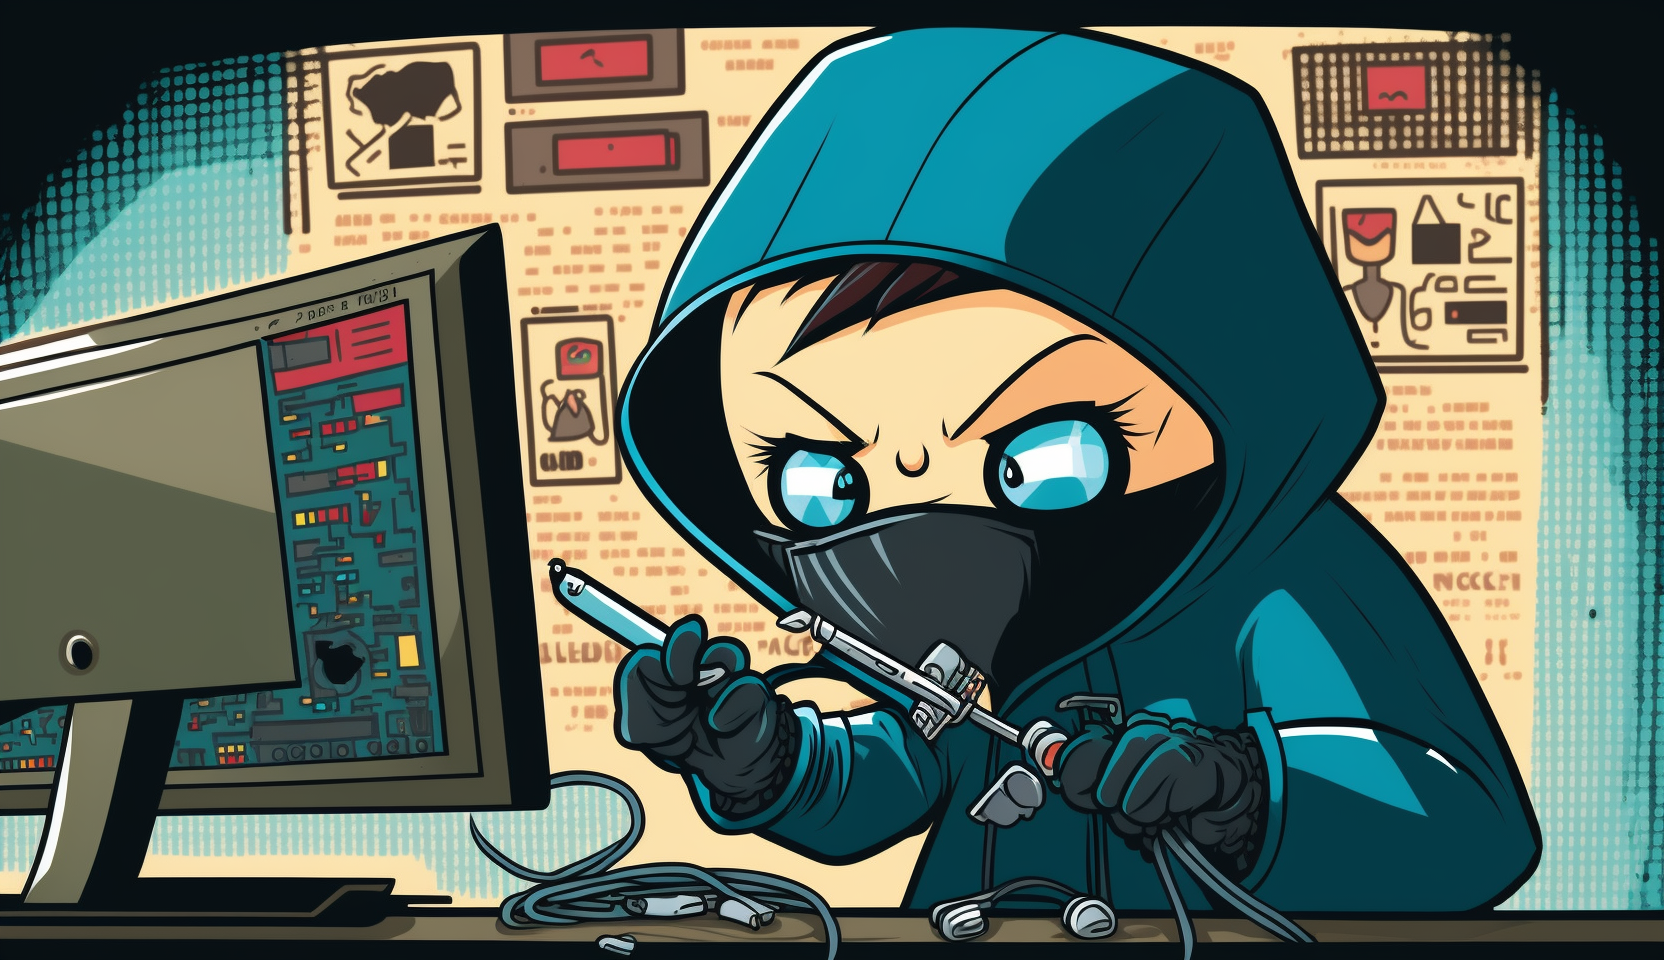 A cartoon hacker wearing a balaclava and holding a magnifying glass, examining a computer screen displaying various hacking testing tools like Nmap, Metasploit, Wireshark, and Burp Suite, with digital locks symbolizing secured systems in the background.